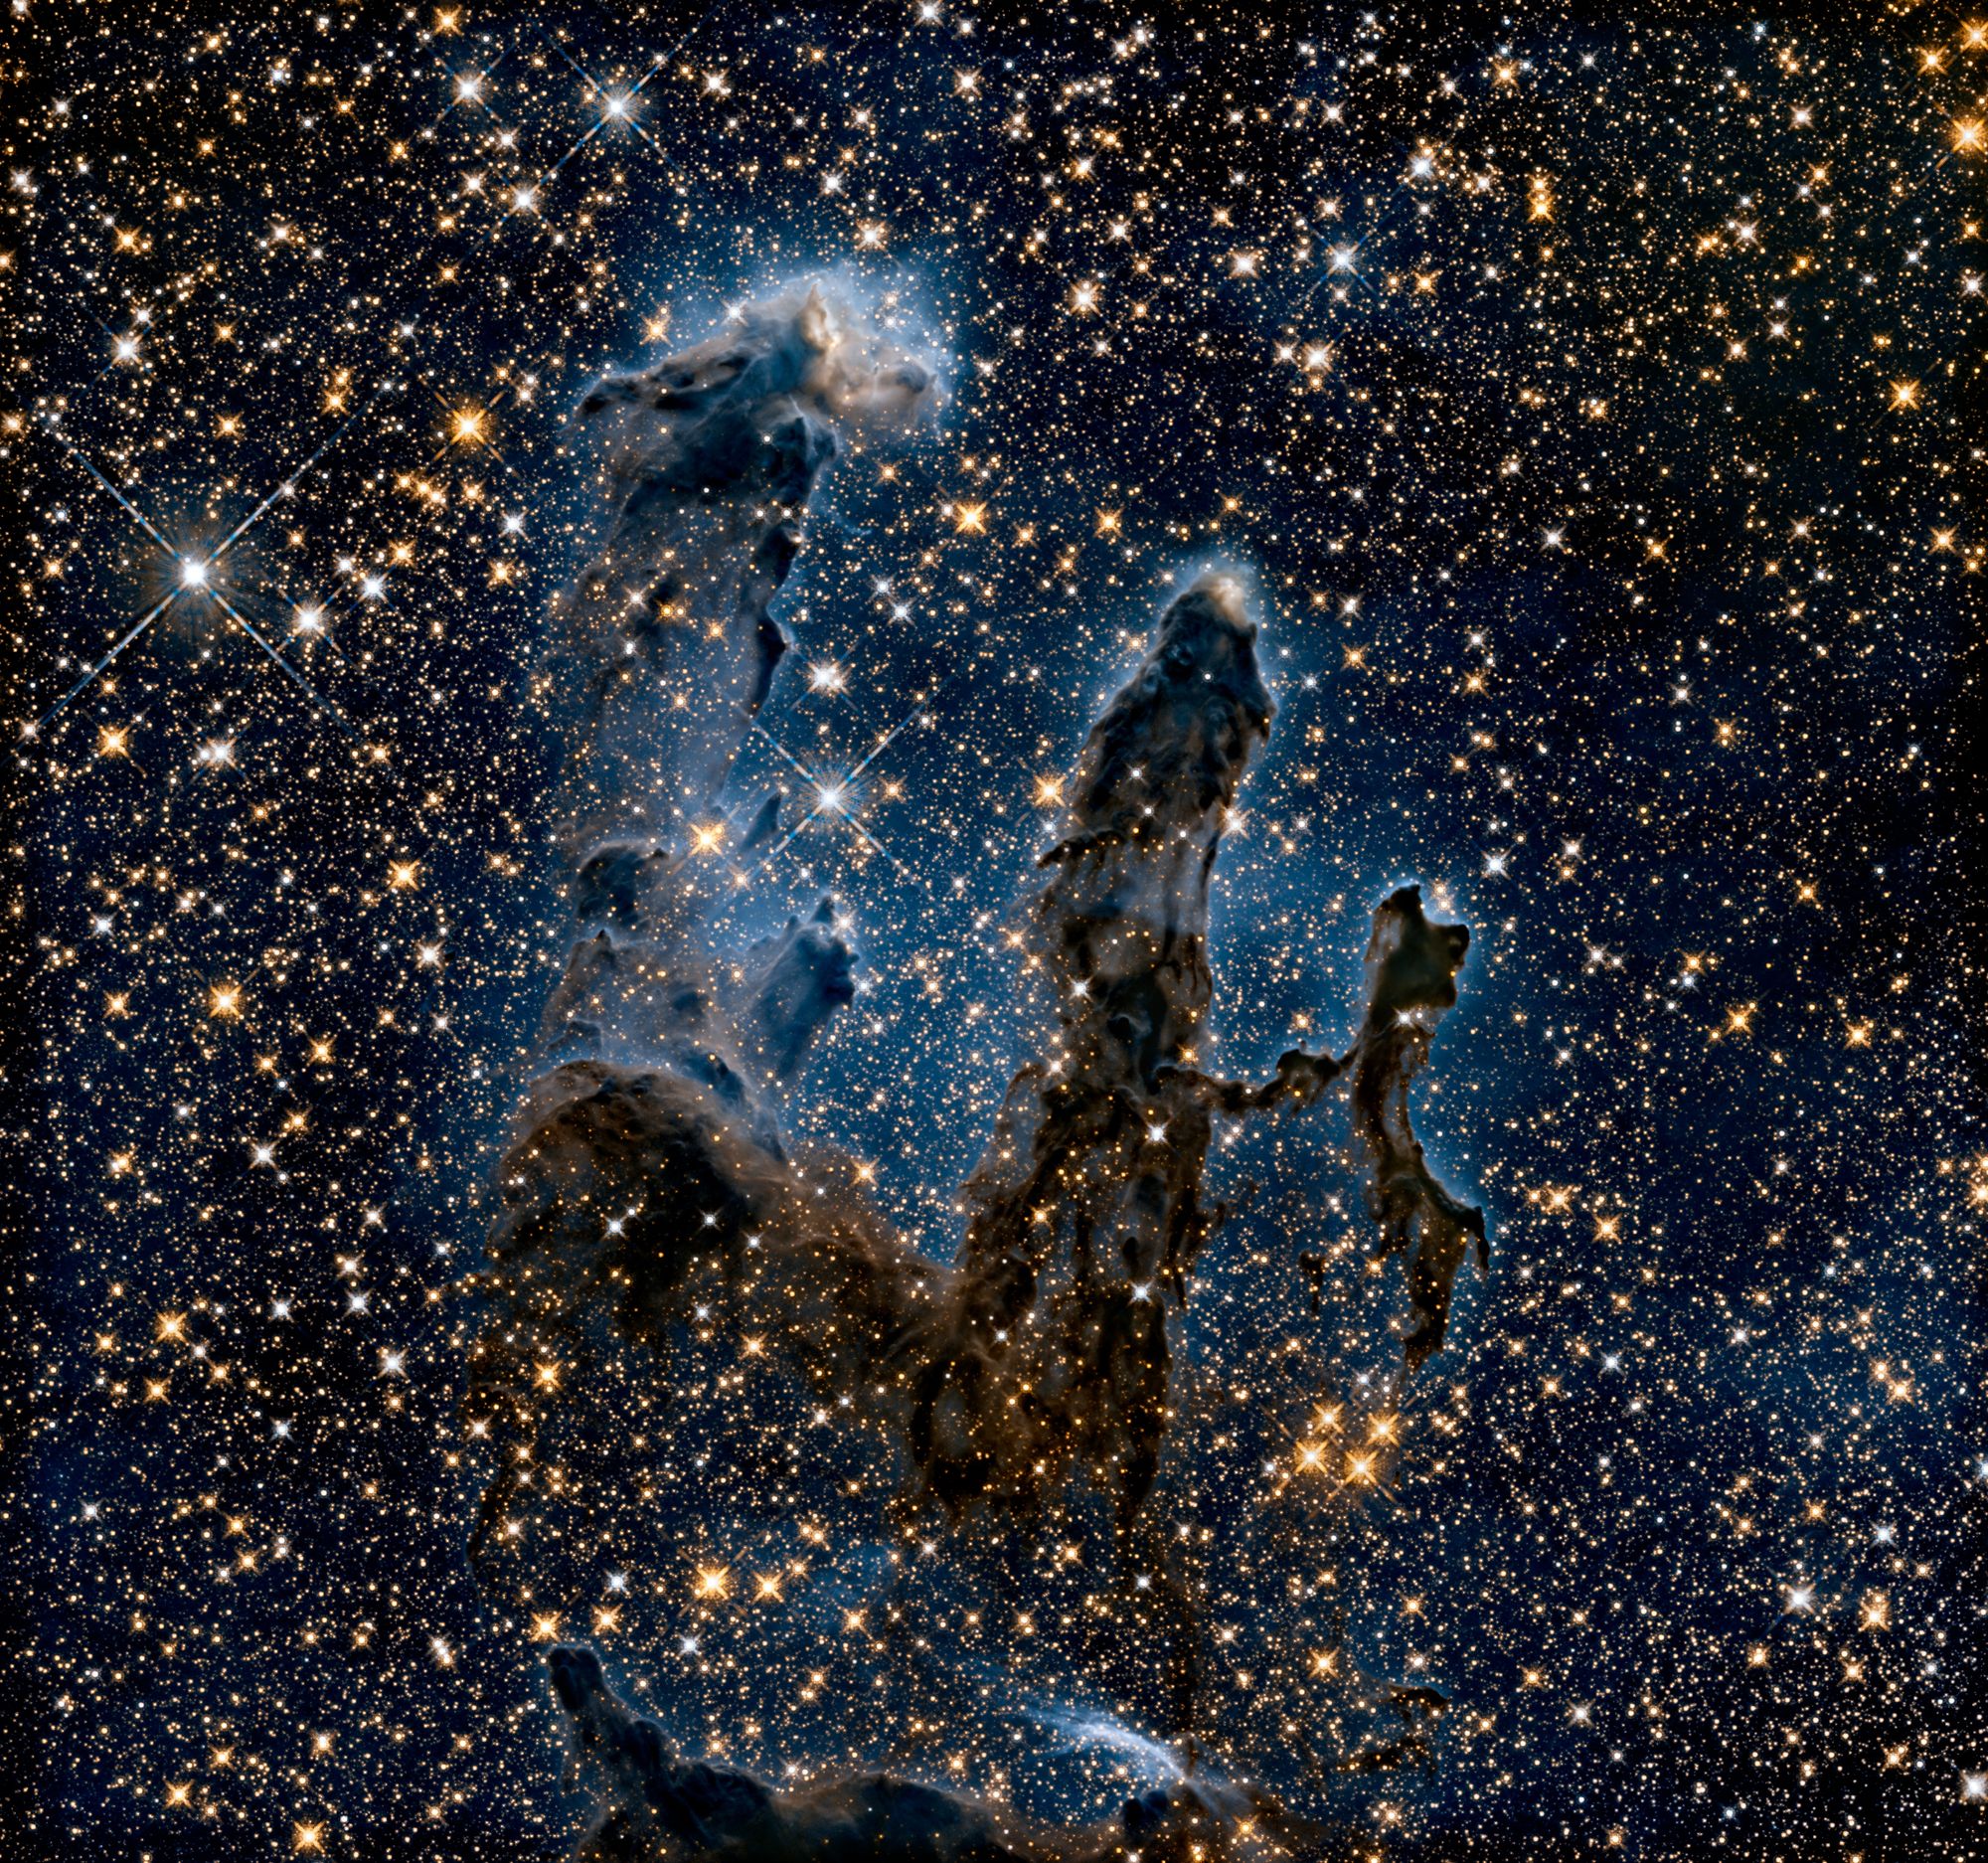 Pillars Of Creation Infrared View (Hubble)